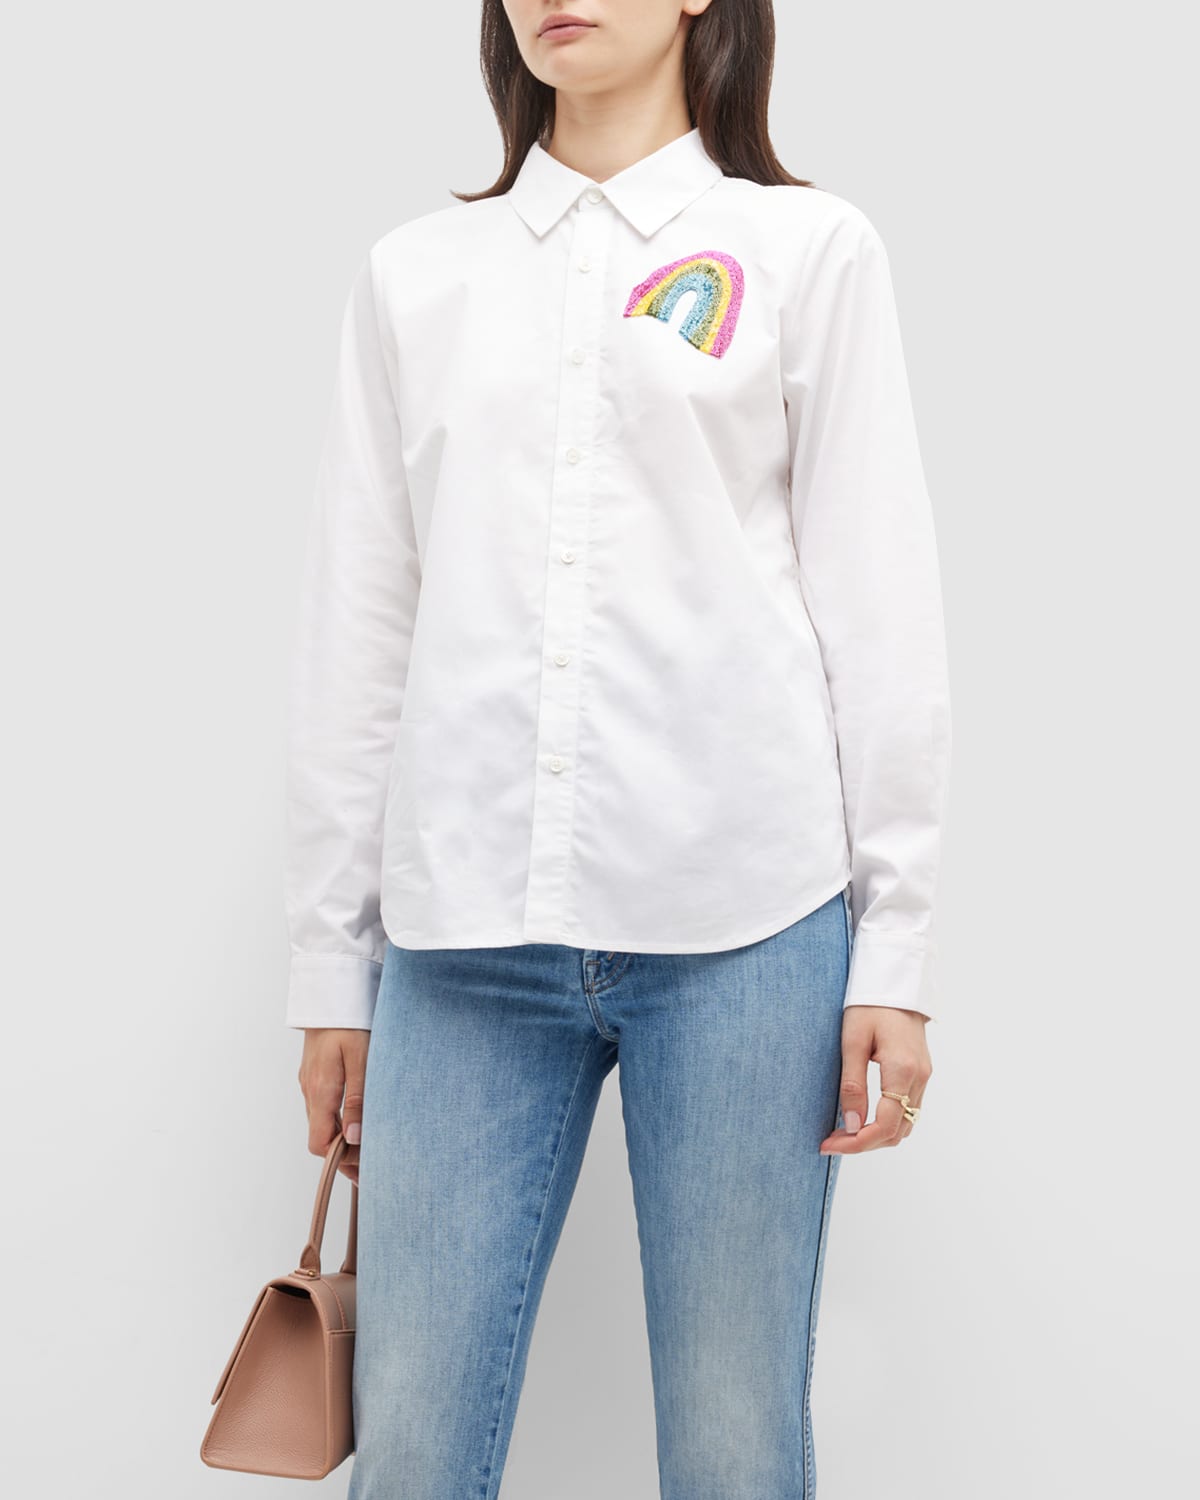 Lingua Franca Rainbow Embroidered Button-Down Shirt